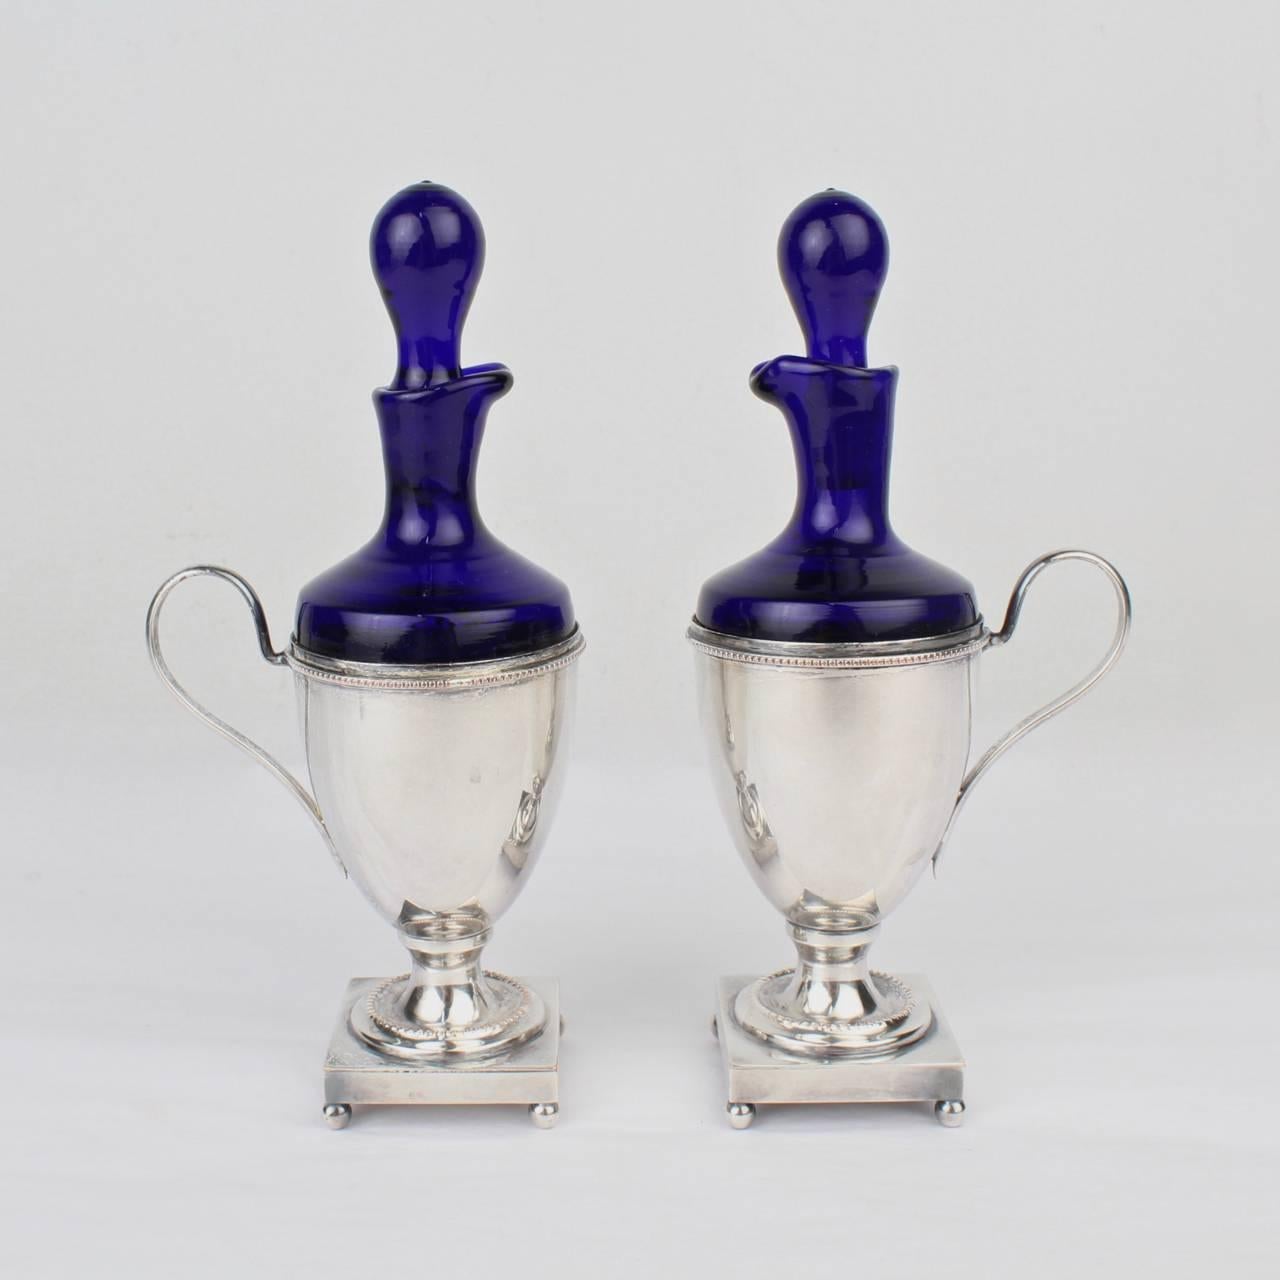 A fine matched pair of oil and vinegar cruets in by Israel Freeman.

Consisting of silver plate (on copper) bases and cobalt blue glass bottles and stoppers.

Bases marked for Israel Freeman of New York.

Height: ca. 6 3/4 inches.





 